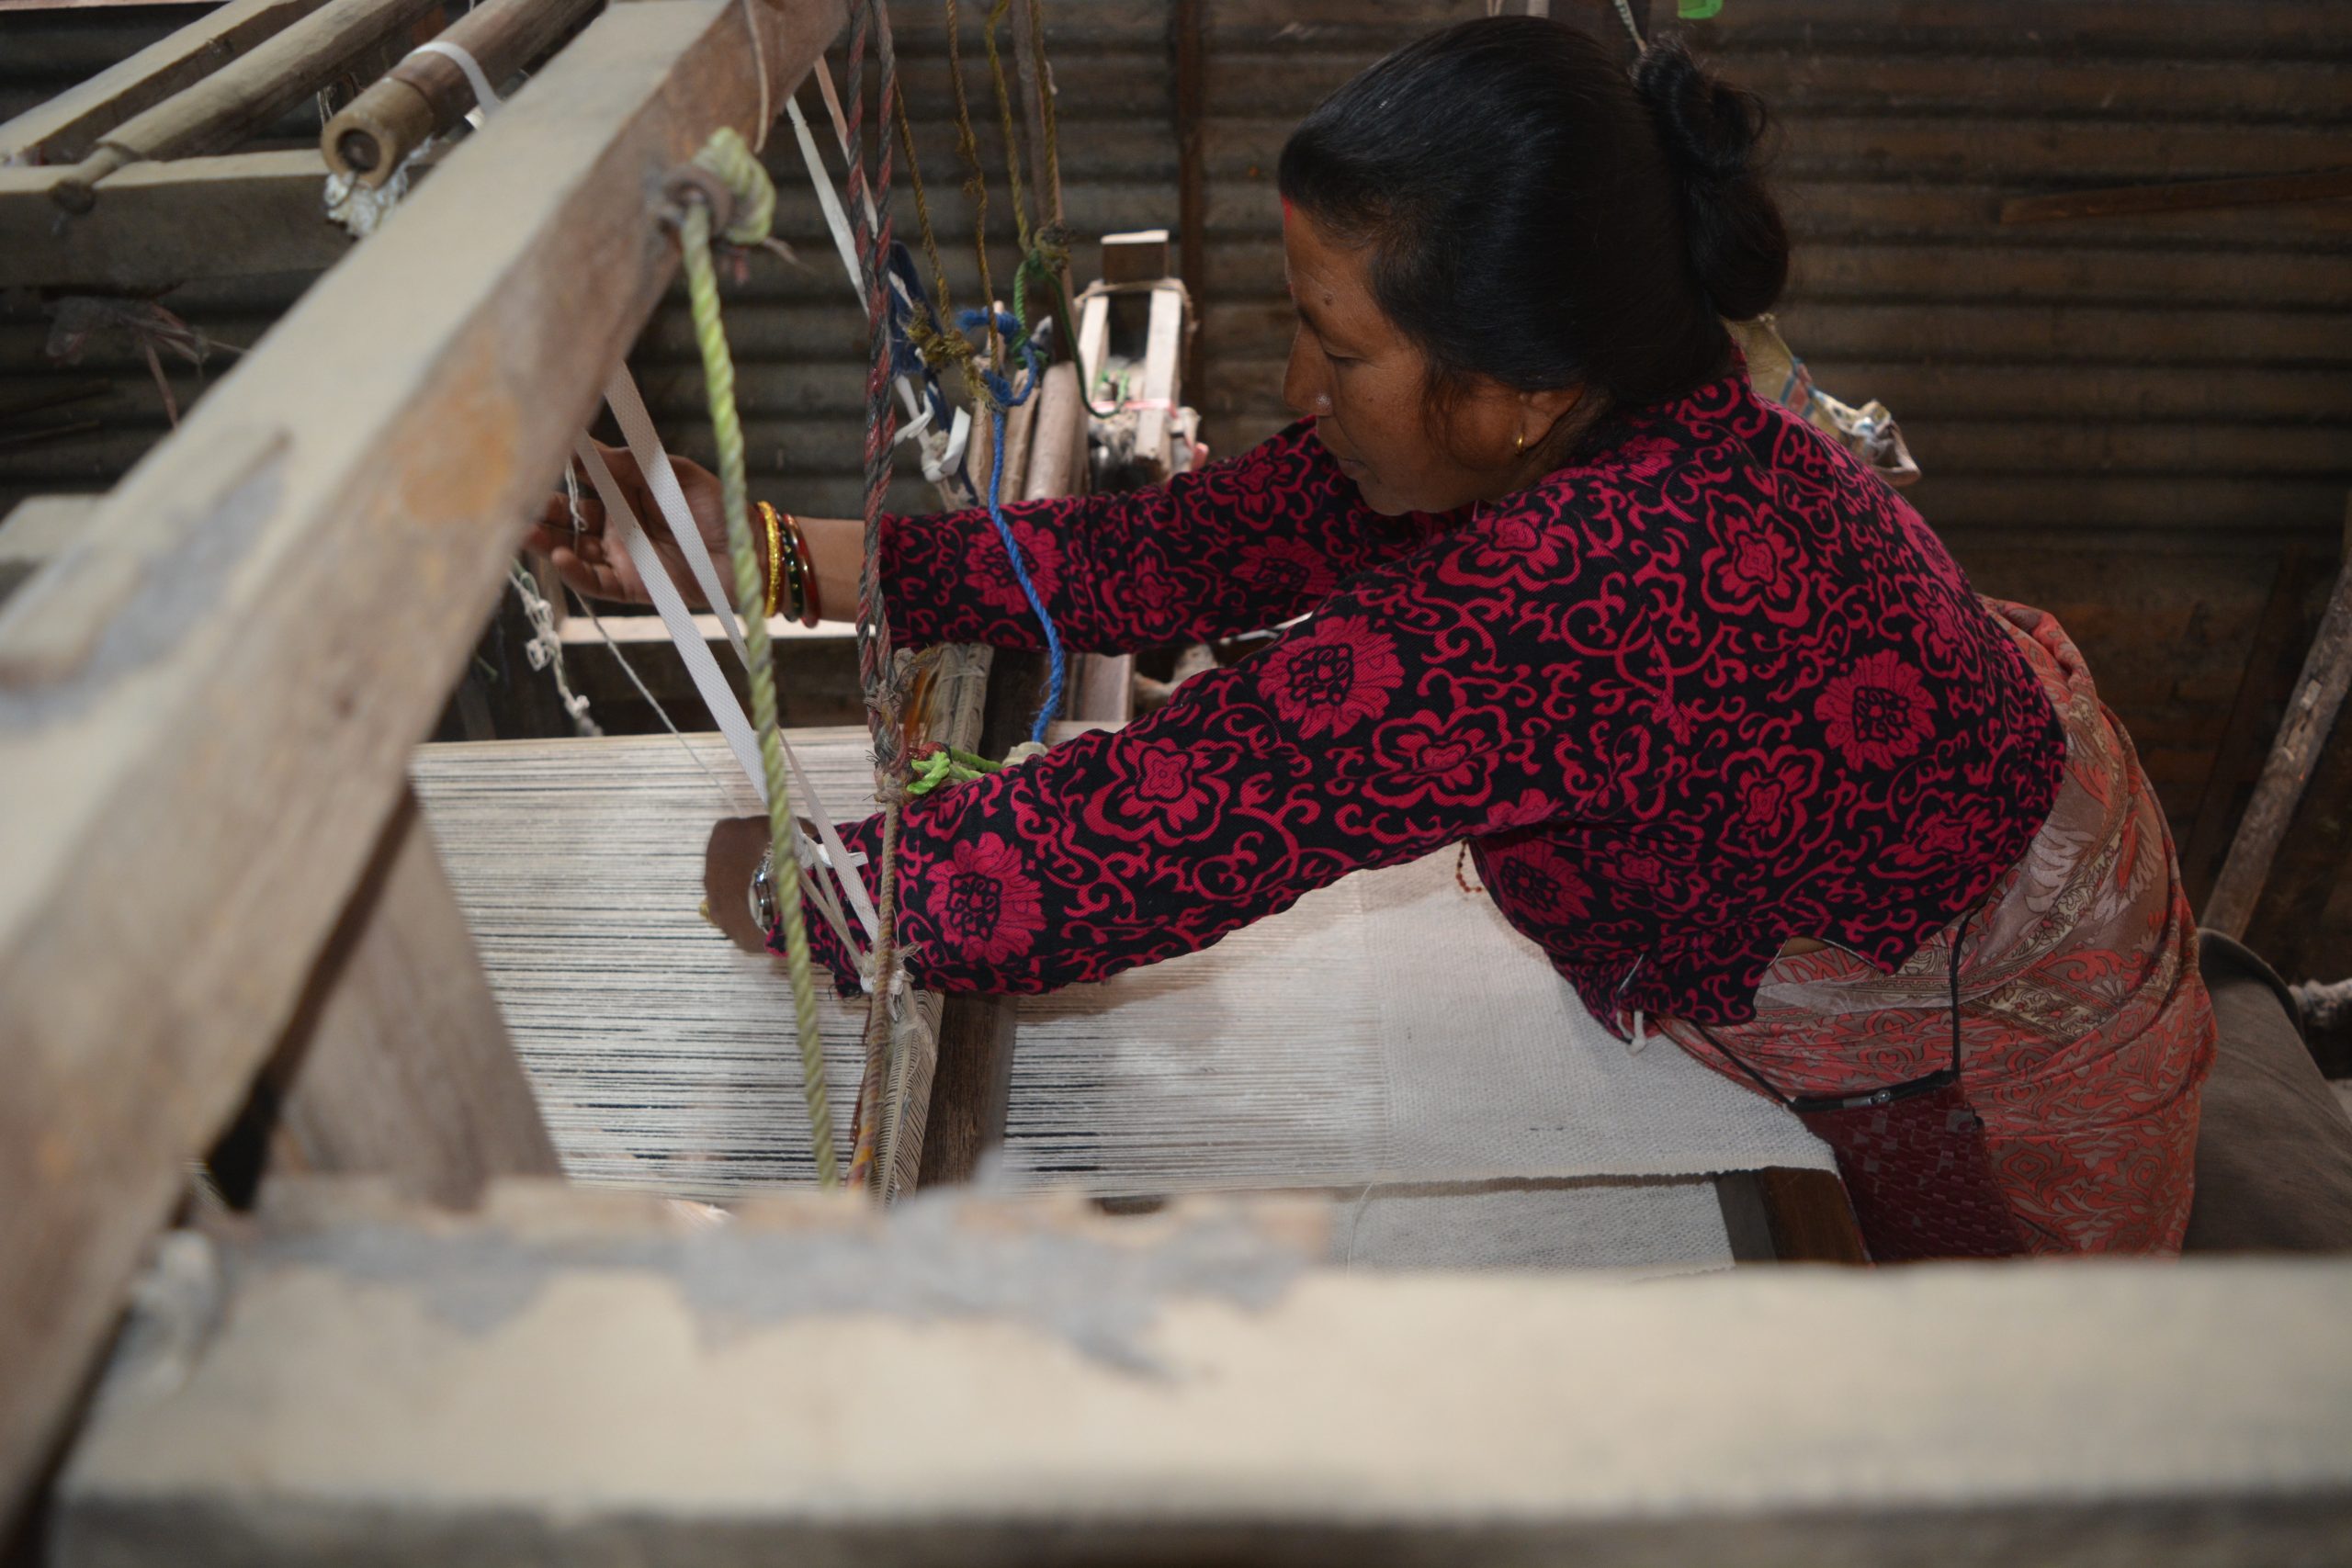 A woman works with her handloom to weave cloth. Photo: Didi-Bahini Creations